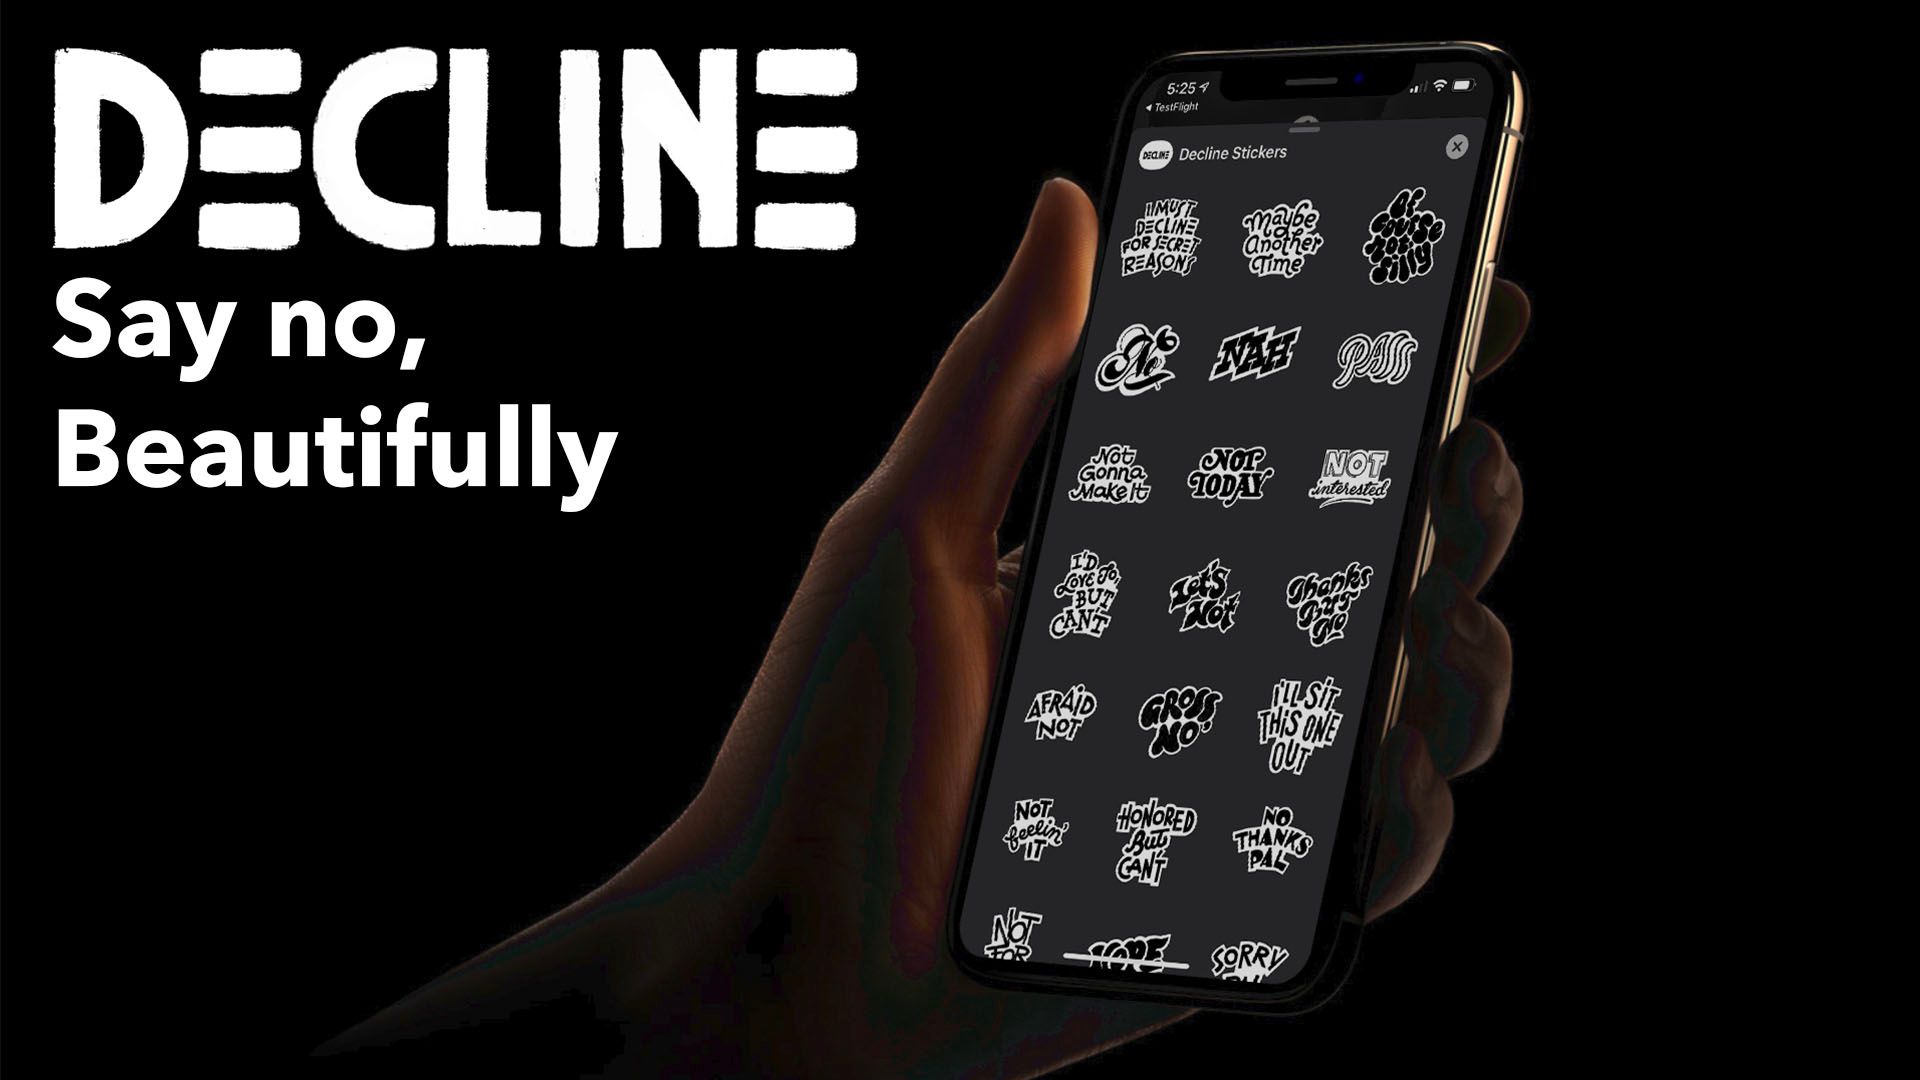 Decline: A Sticker Pack for Saying No, Beautifully